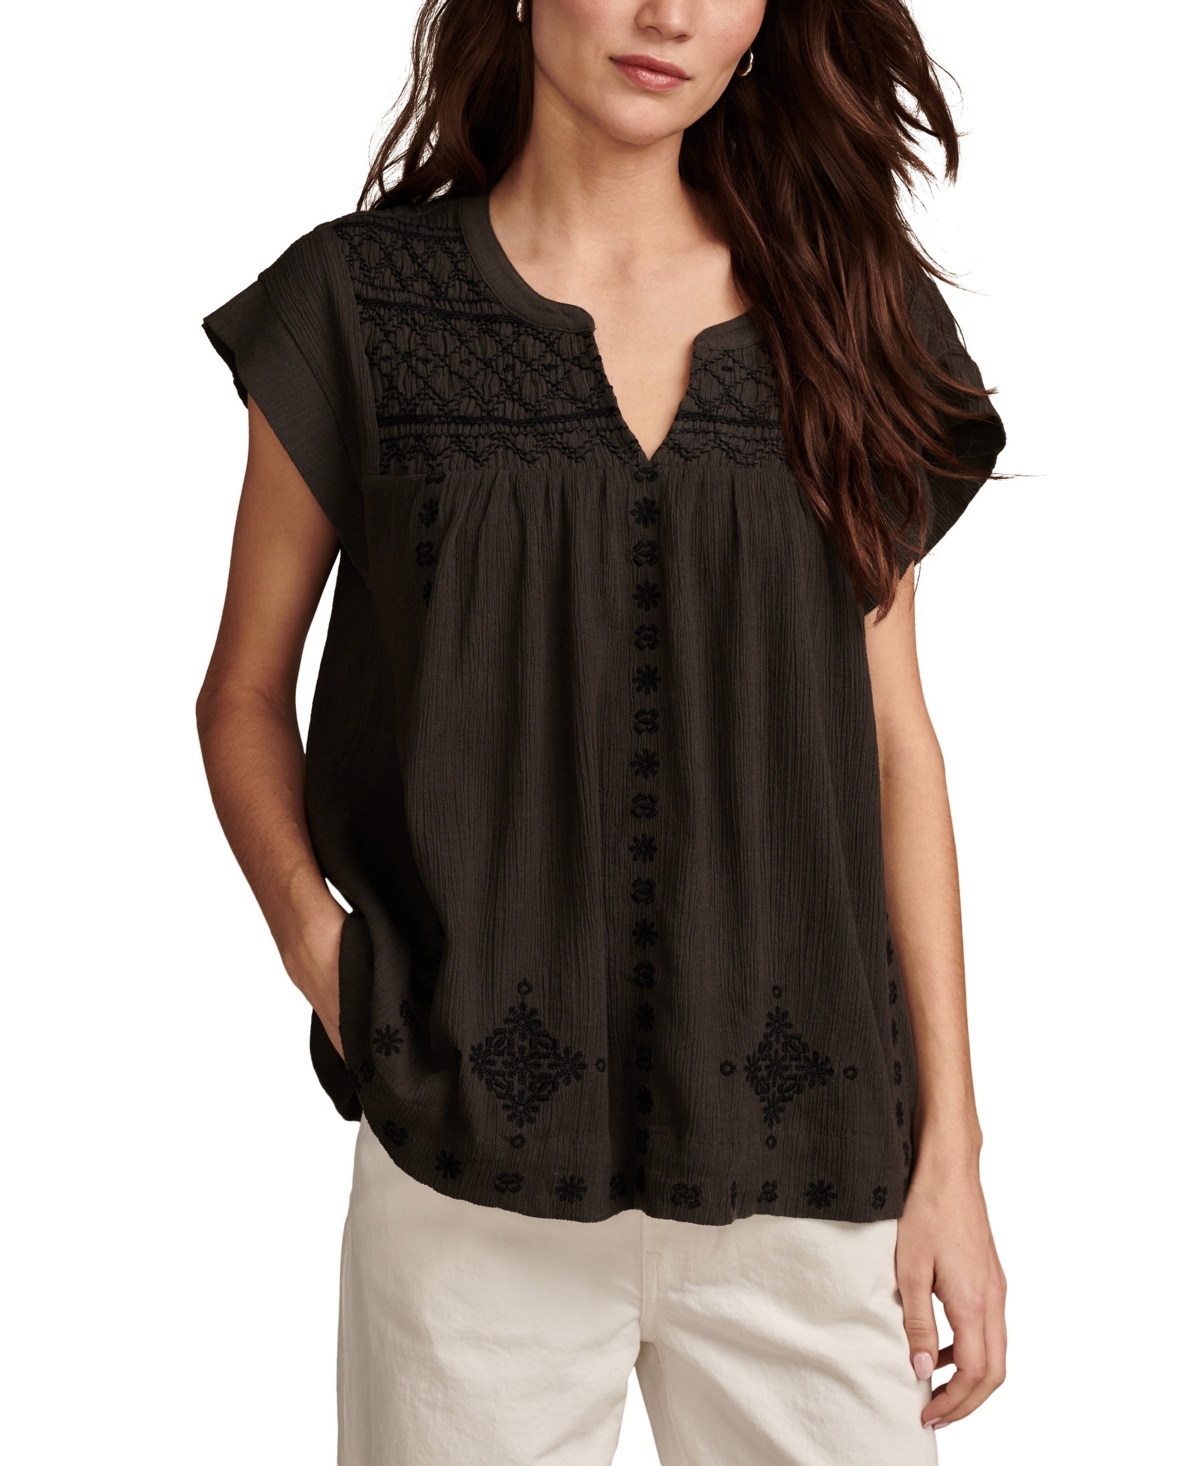 Women's Cotton Smocked Embroidered Popover Blouse - Raven